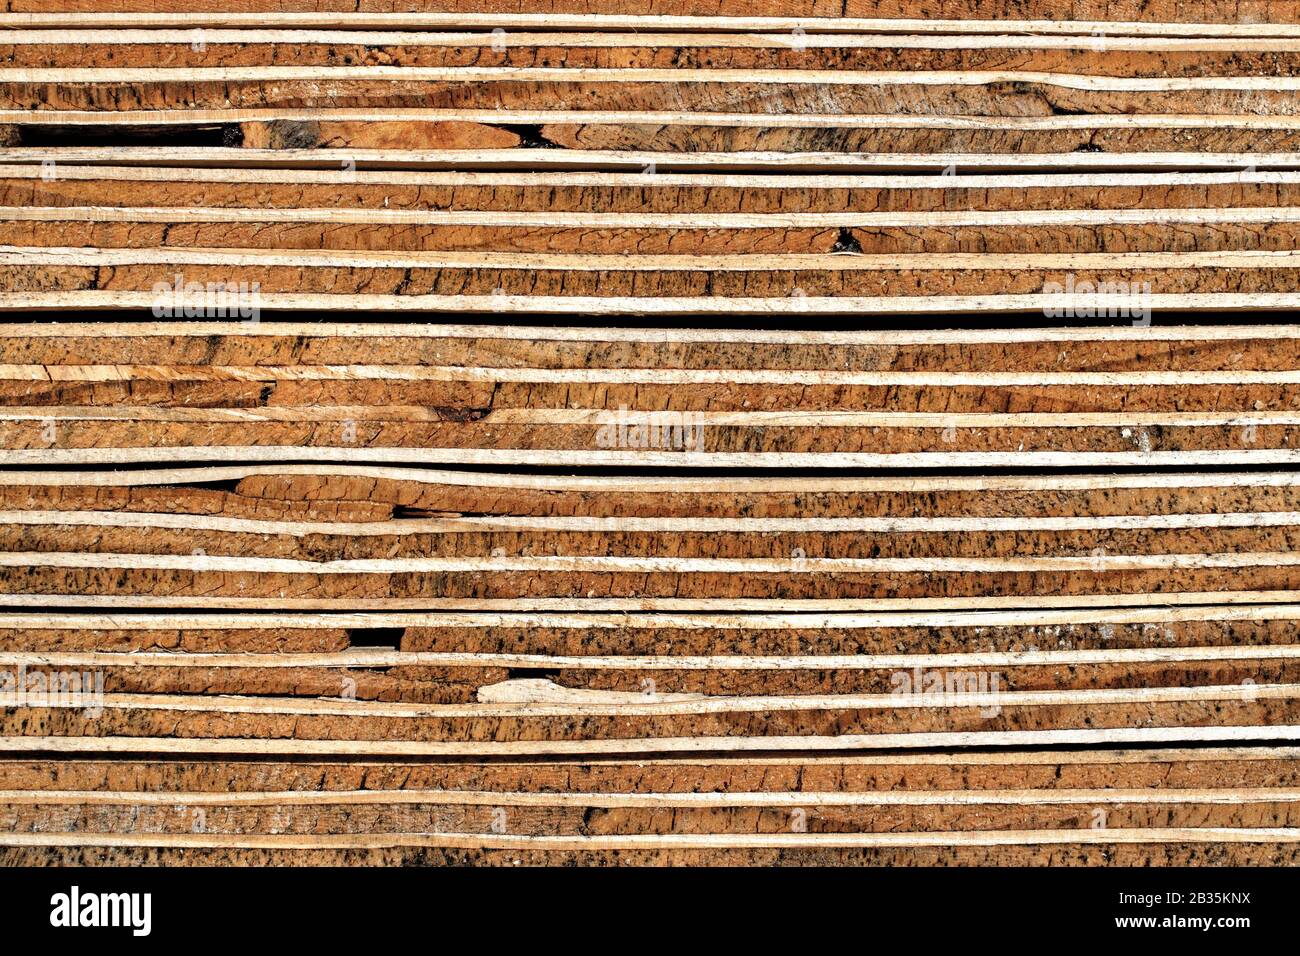 Construction Wood Texture Background: Weathered Cross Section of Piled Plywood Panels - Detail Stock Photo